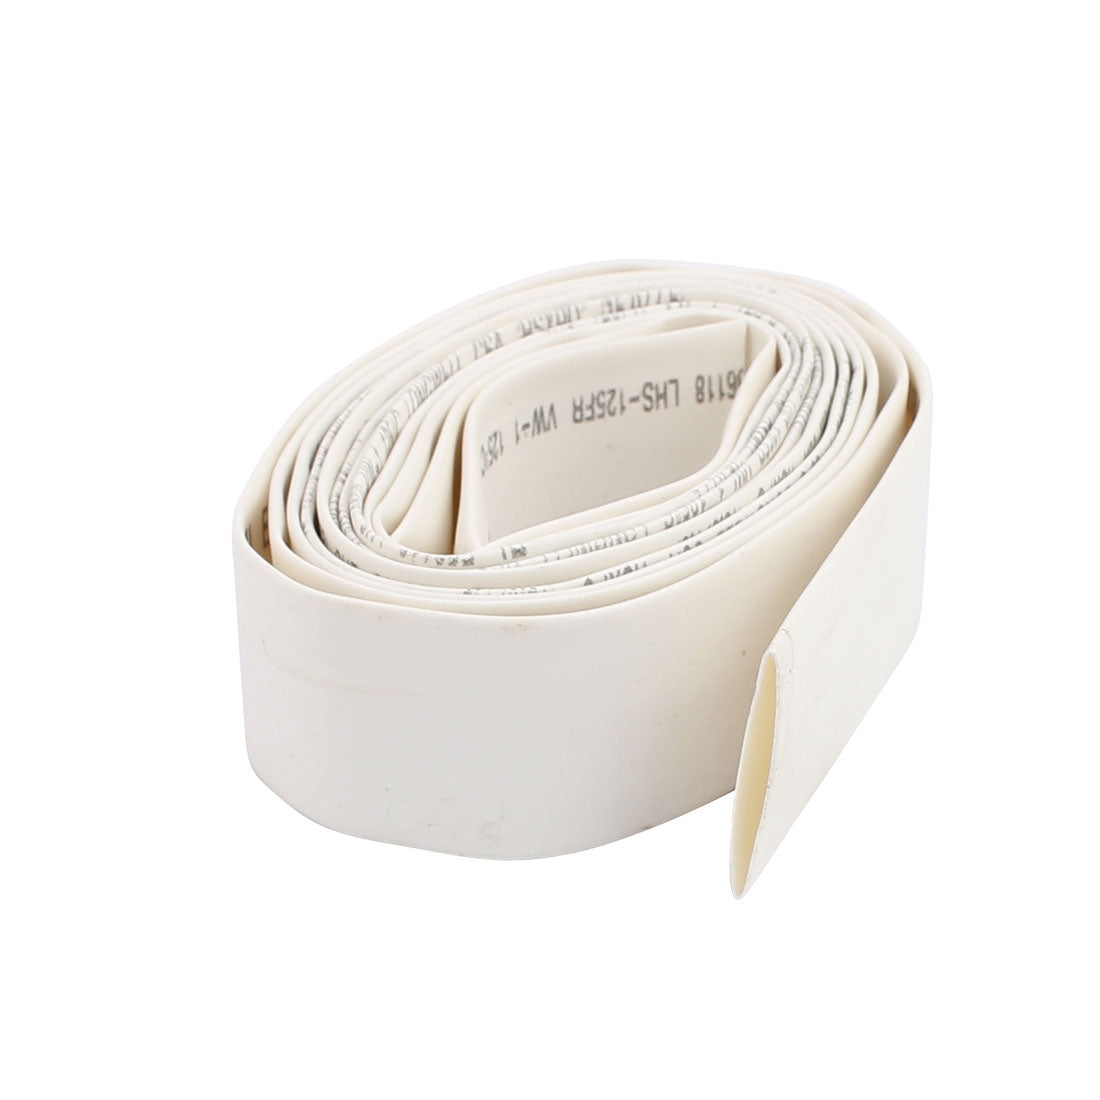 uxcell Uxcell 15mm Dia 2:1 Heat Shrink Tubing Tube Sleeving Wire Cable White 1.9M Length